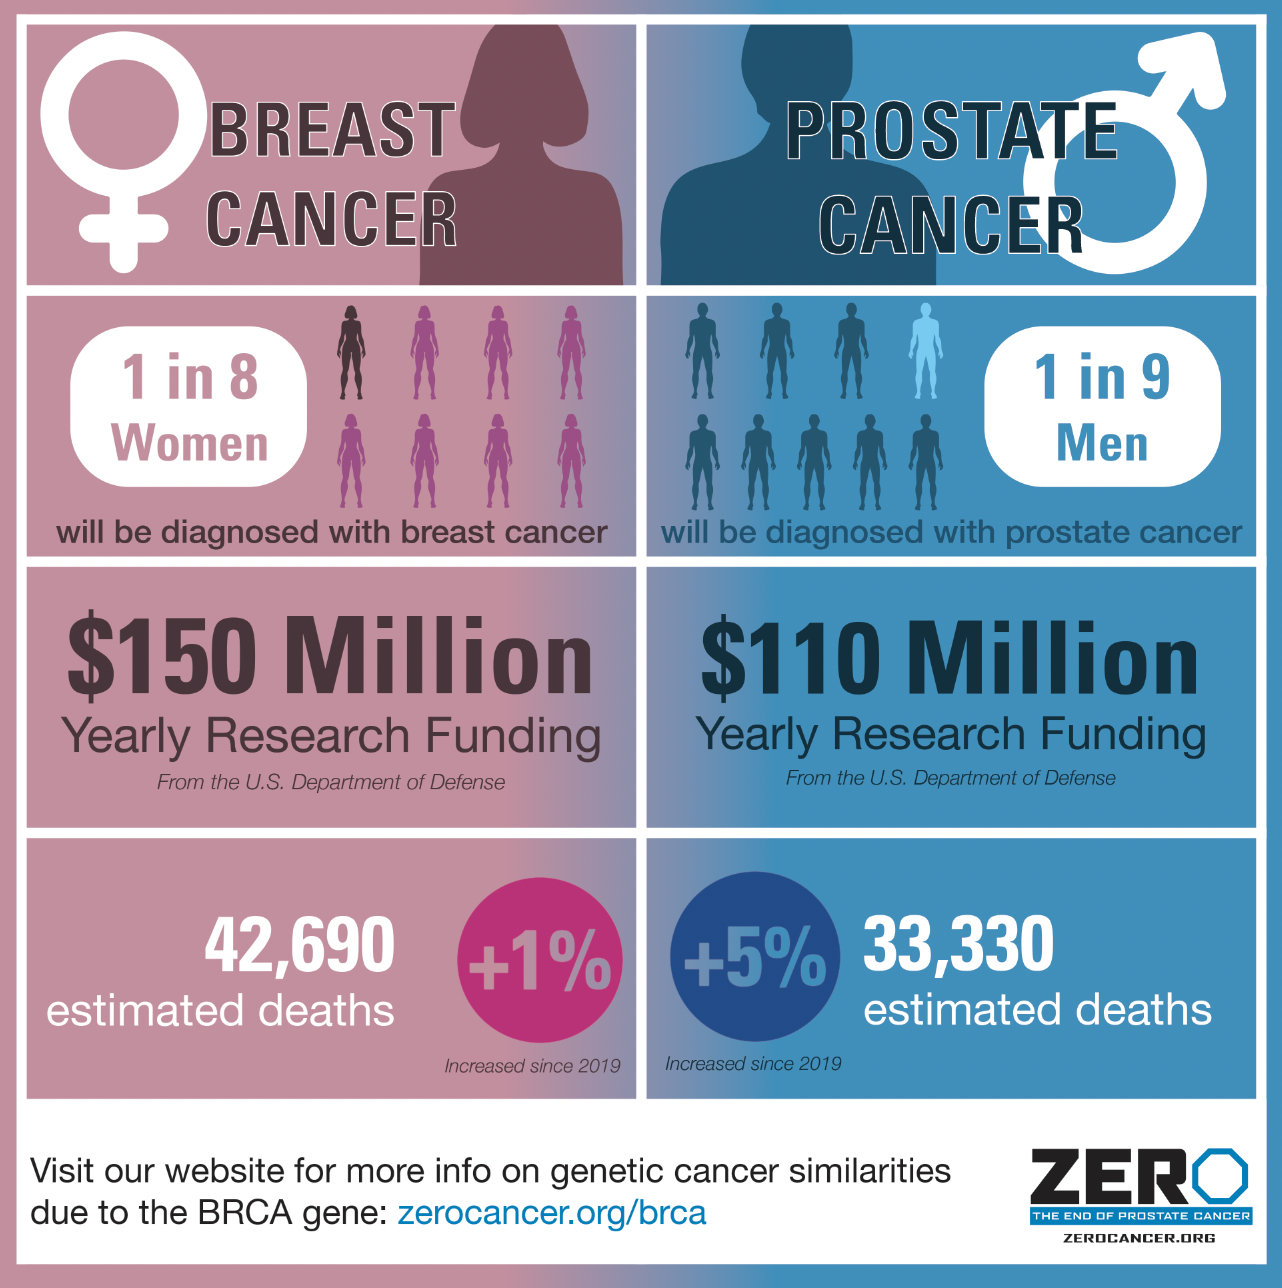 BRCA Gene and Prostate Cancer